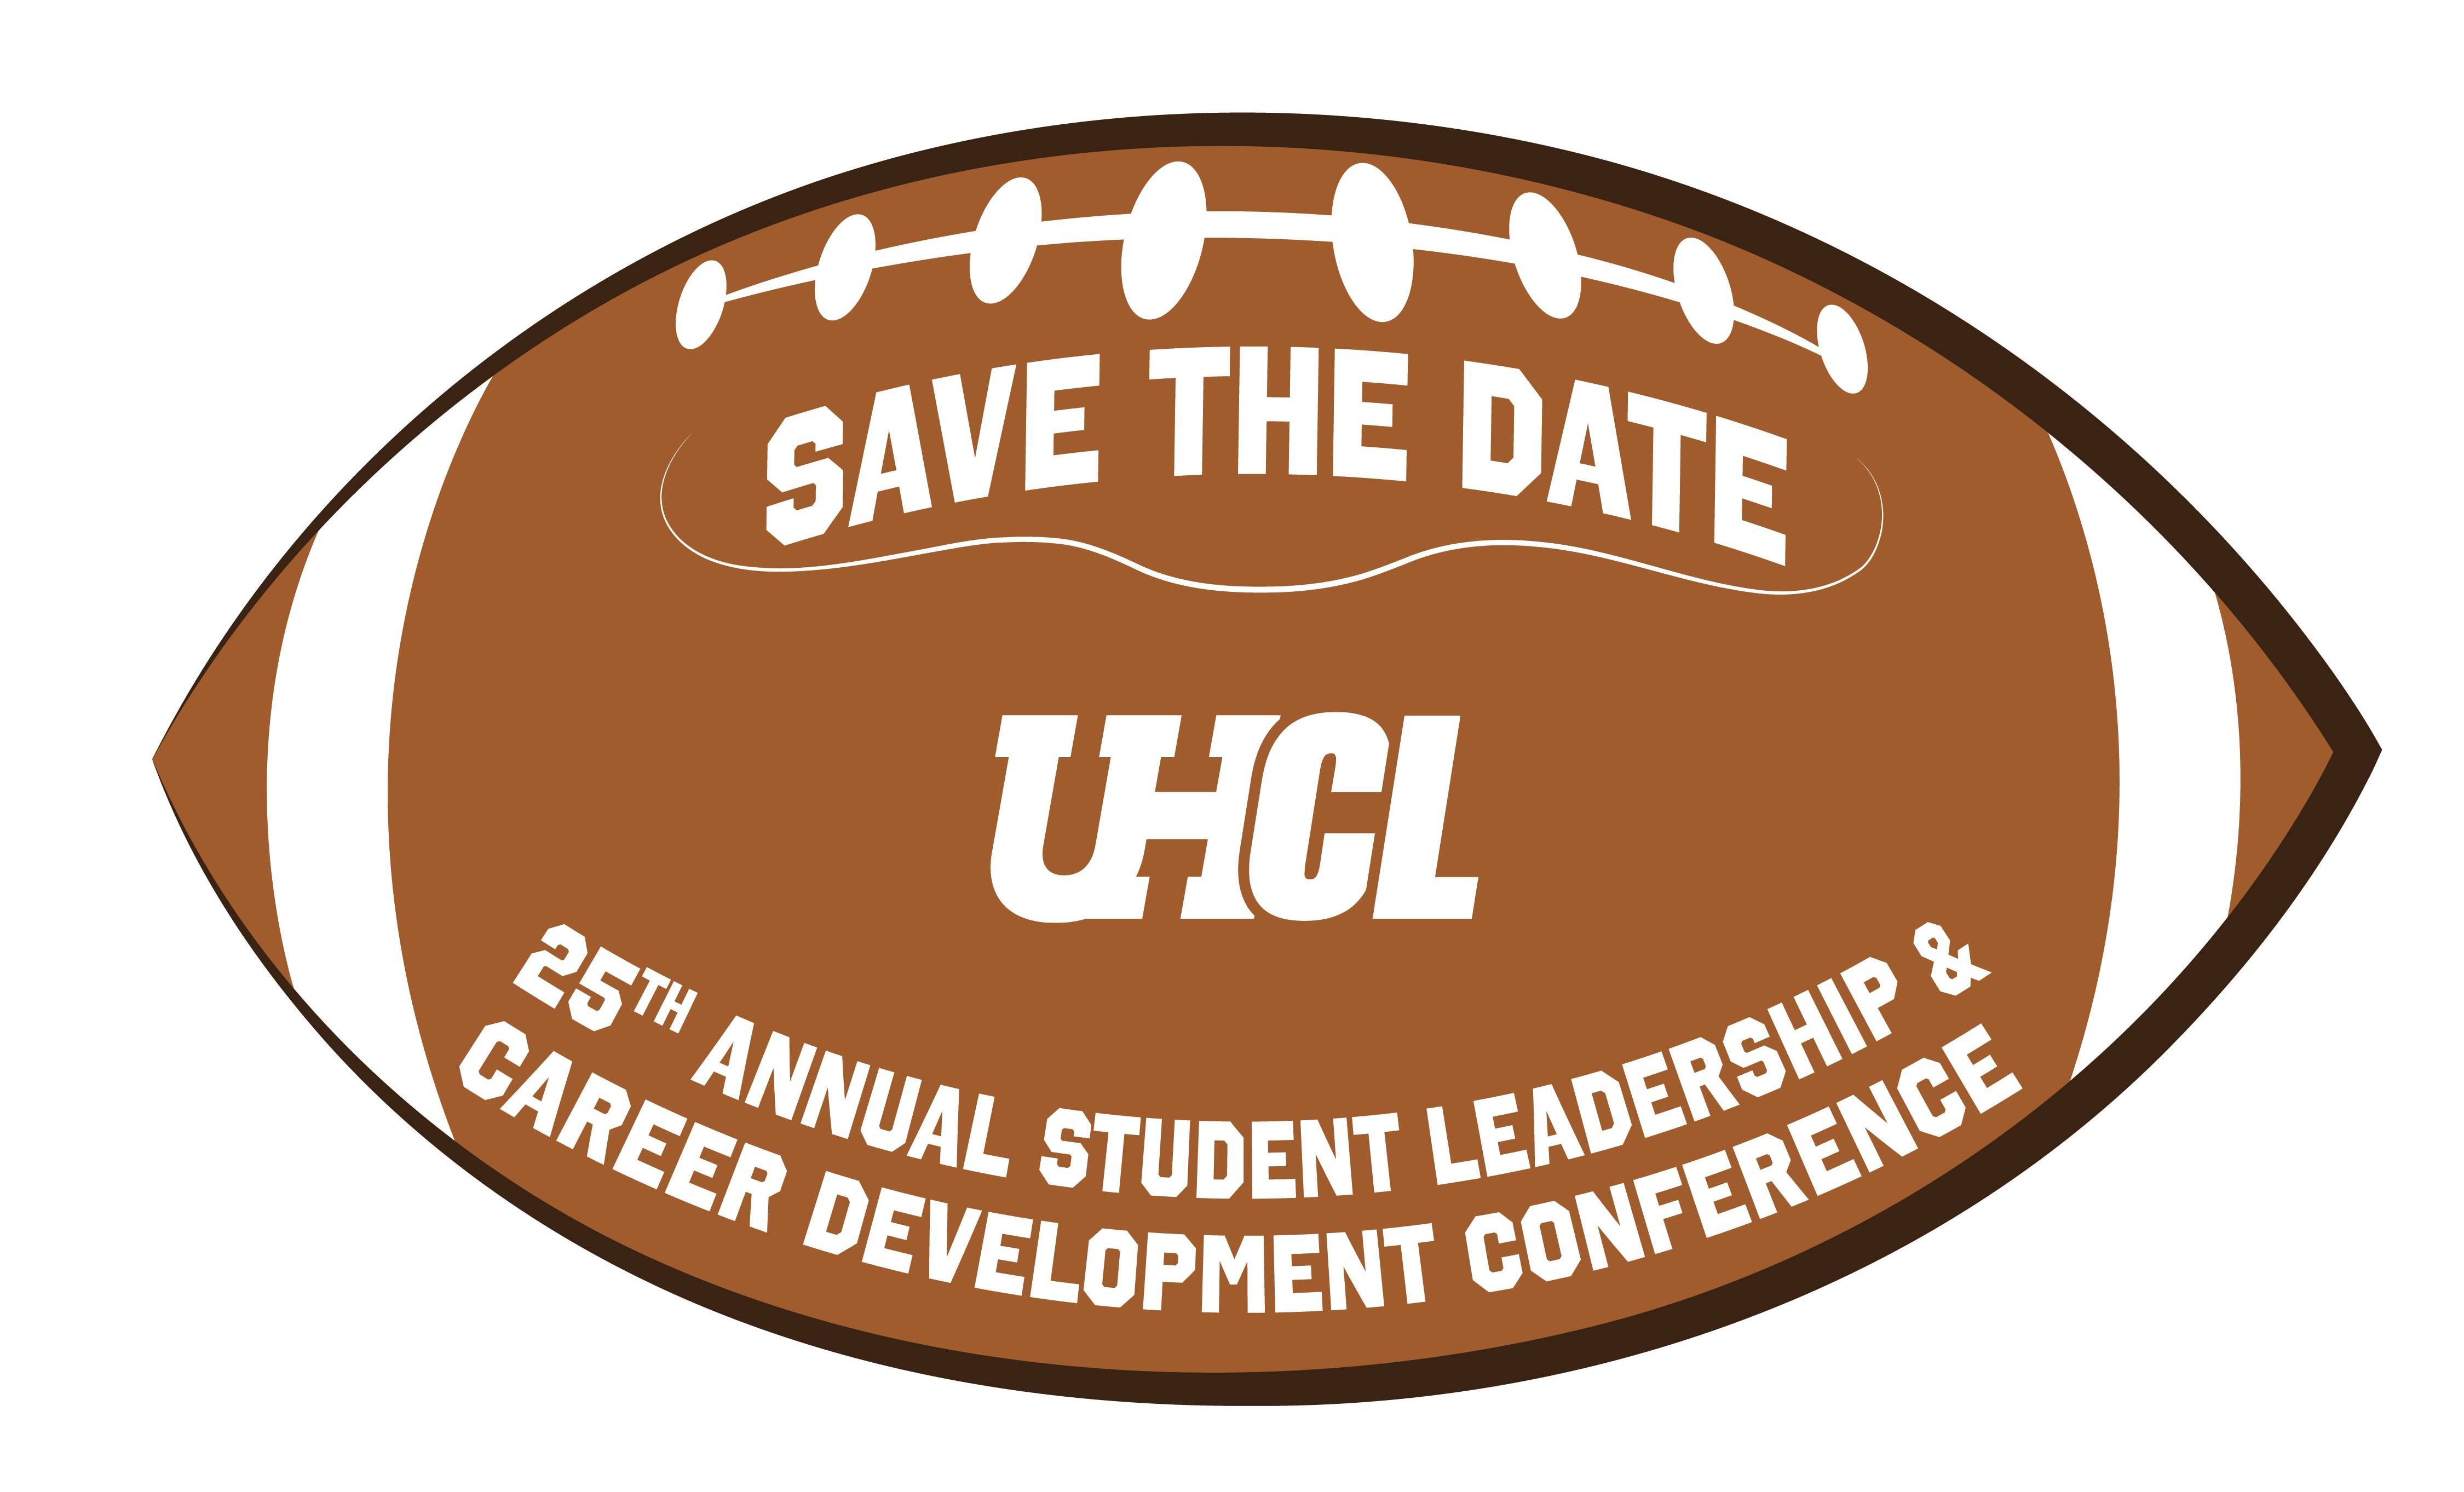 Save the date. football design. 25th Annual Conference